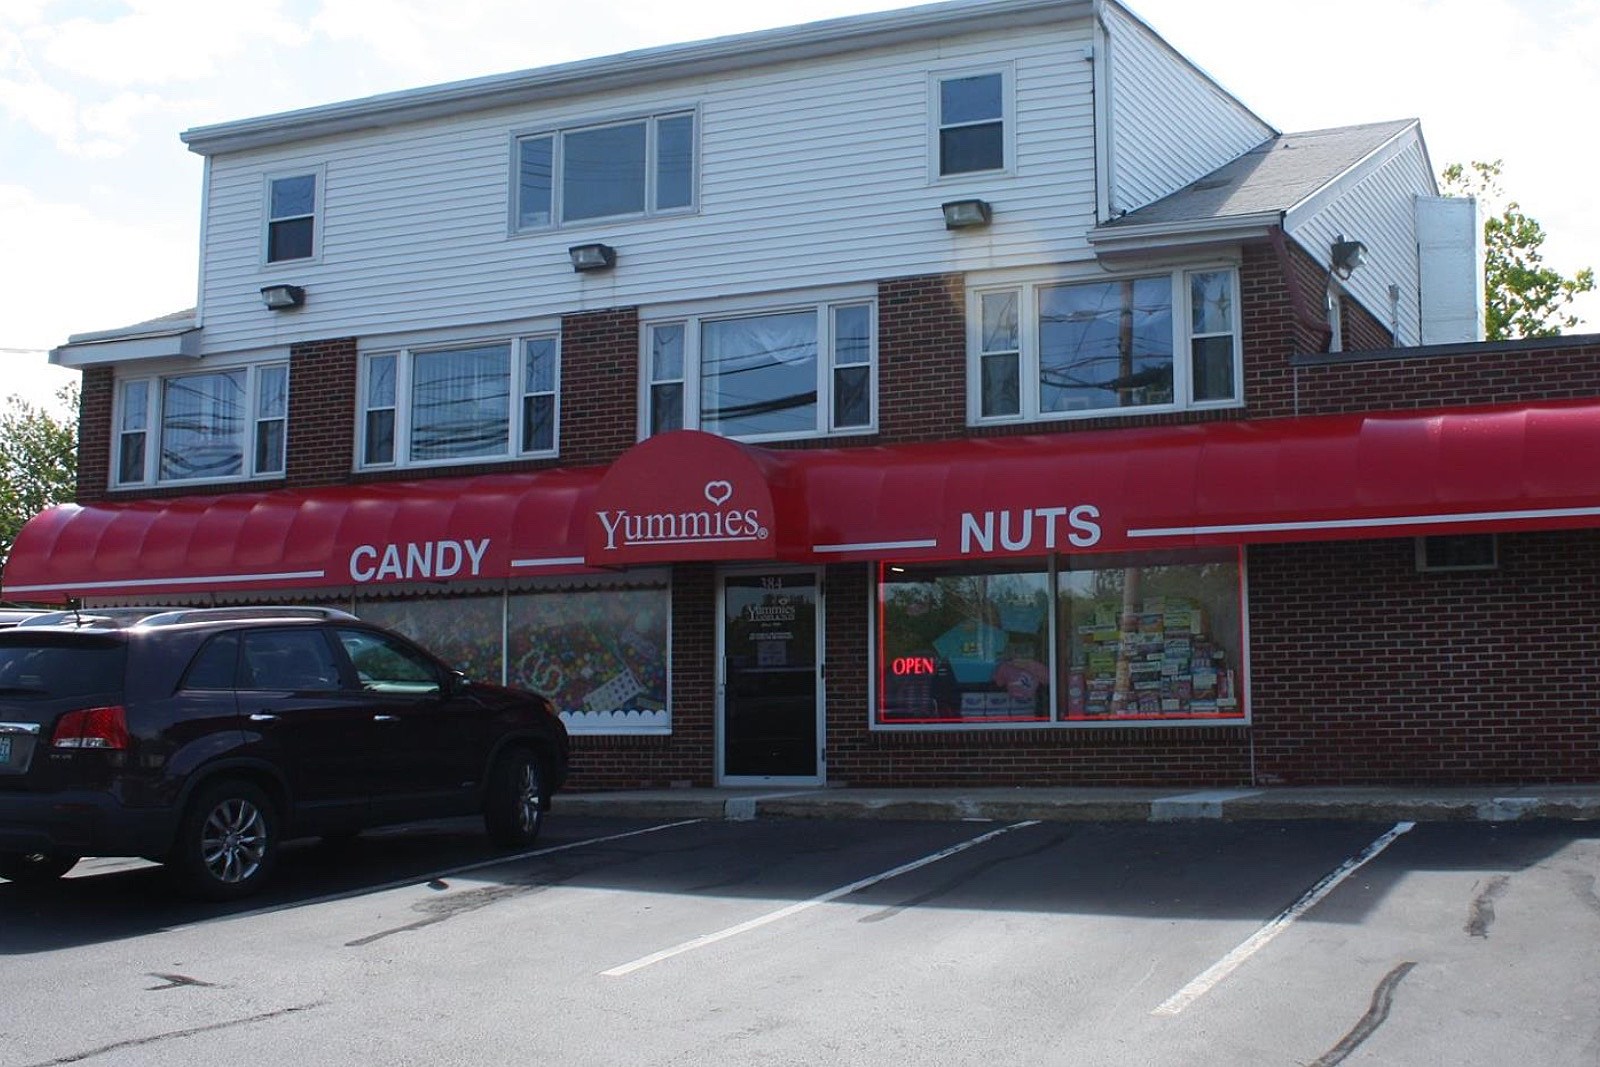 Get The Ultimate Sugar Rush At This Massive Candy Store In Maine